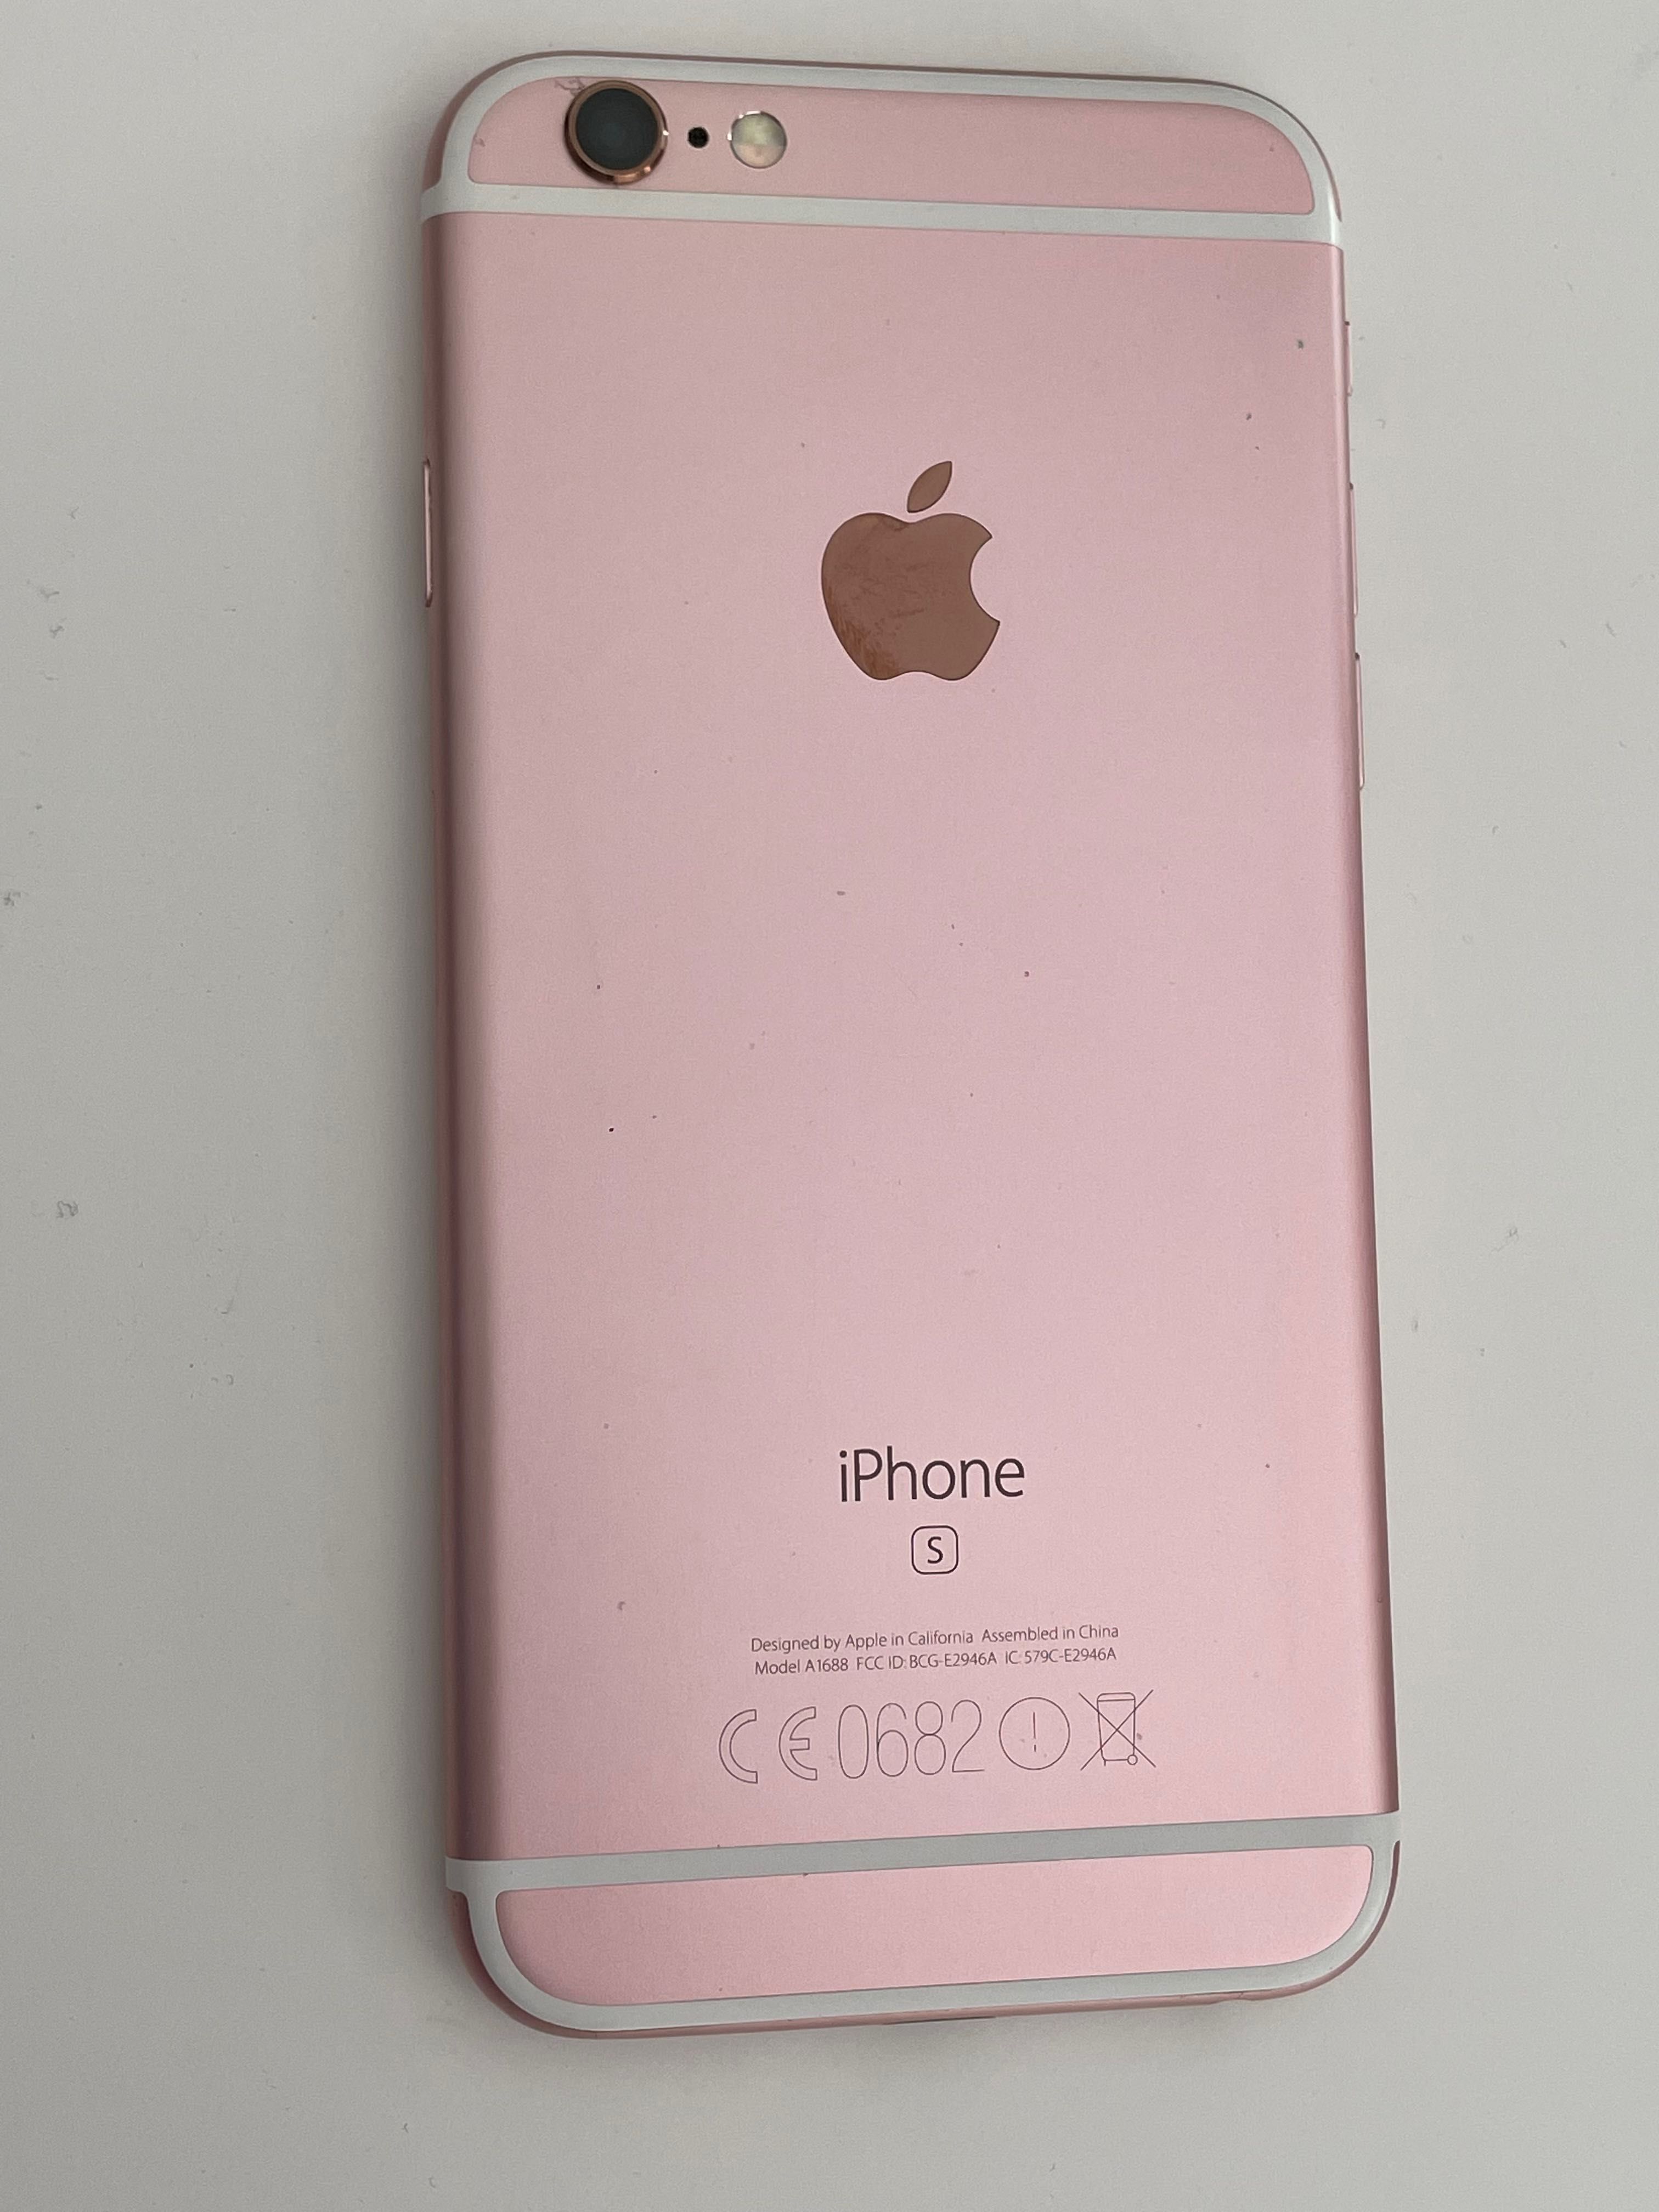 IPhone 6s rose gold